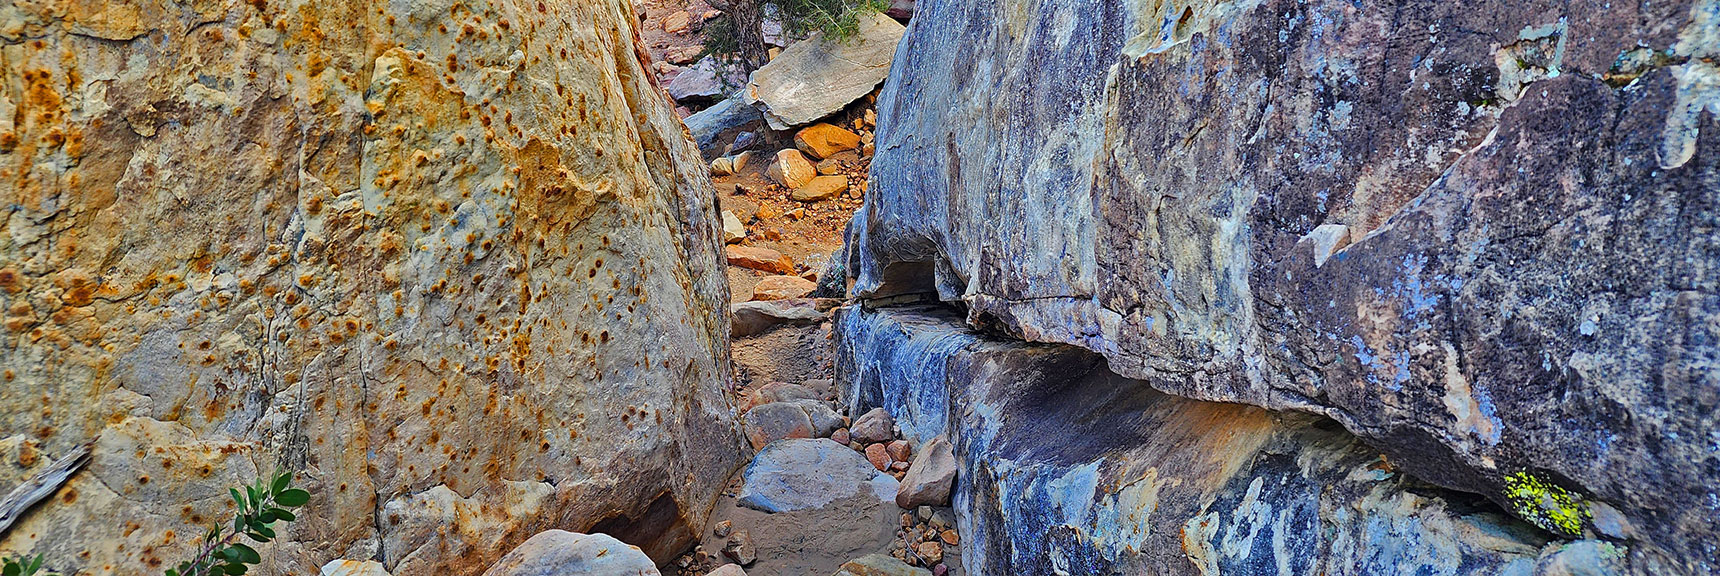 Taking the Loop in a Counterclockwise Direction Helps Avoid Missing This Narrow Turn | Willow Spring Loop, Petroglyph Canyon, Lost Creek Canyon | Red Rock Canyon National Conservation Area, Nevada